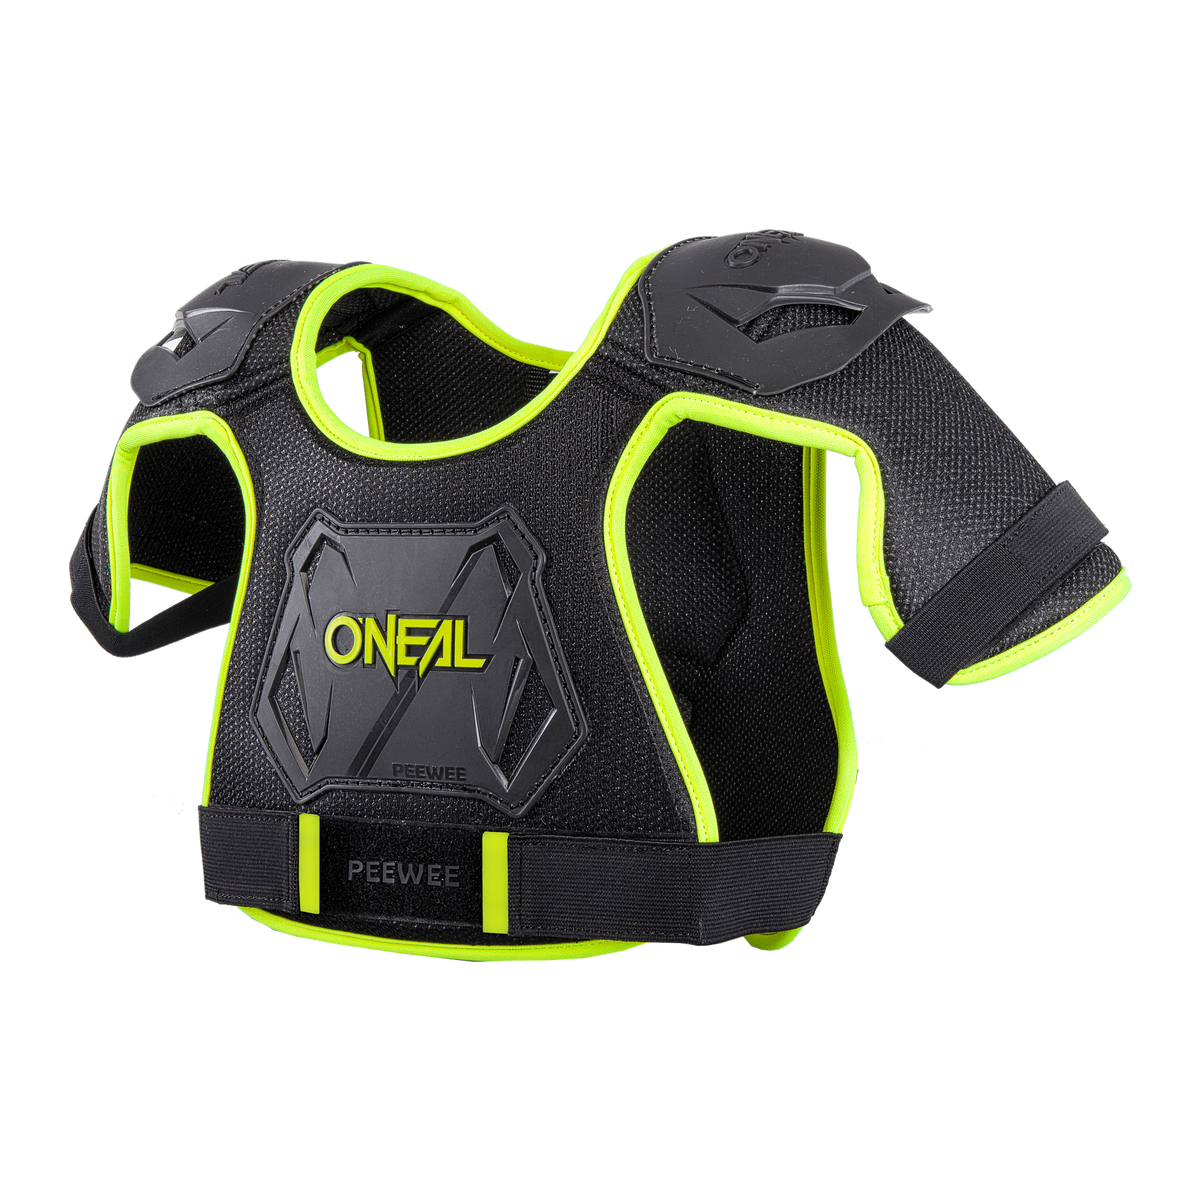 https://cdn.oneal.eu/assets/importedProductImages/PROTECTION/YOUTH/BODY%20ARMOUR/PEEWEE%20CHEST%20GUARD/neon%20yellow/2019_ONeal_PEEWEE_Chest_Guard_neon%20yellow.png